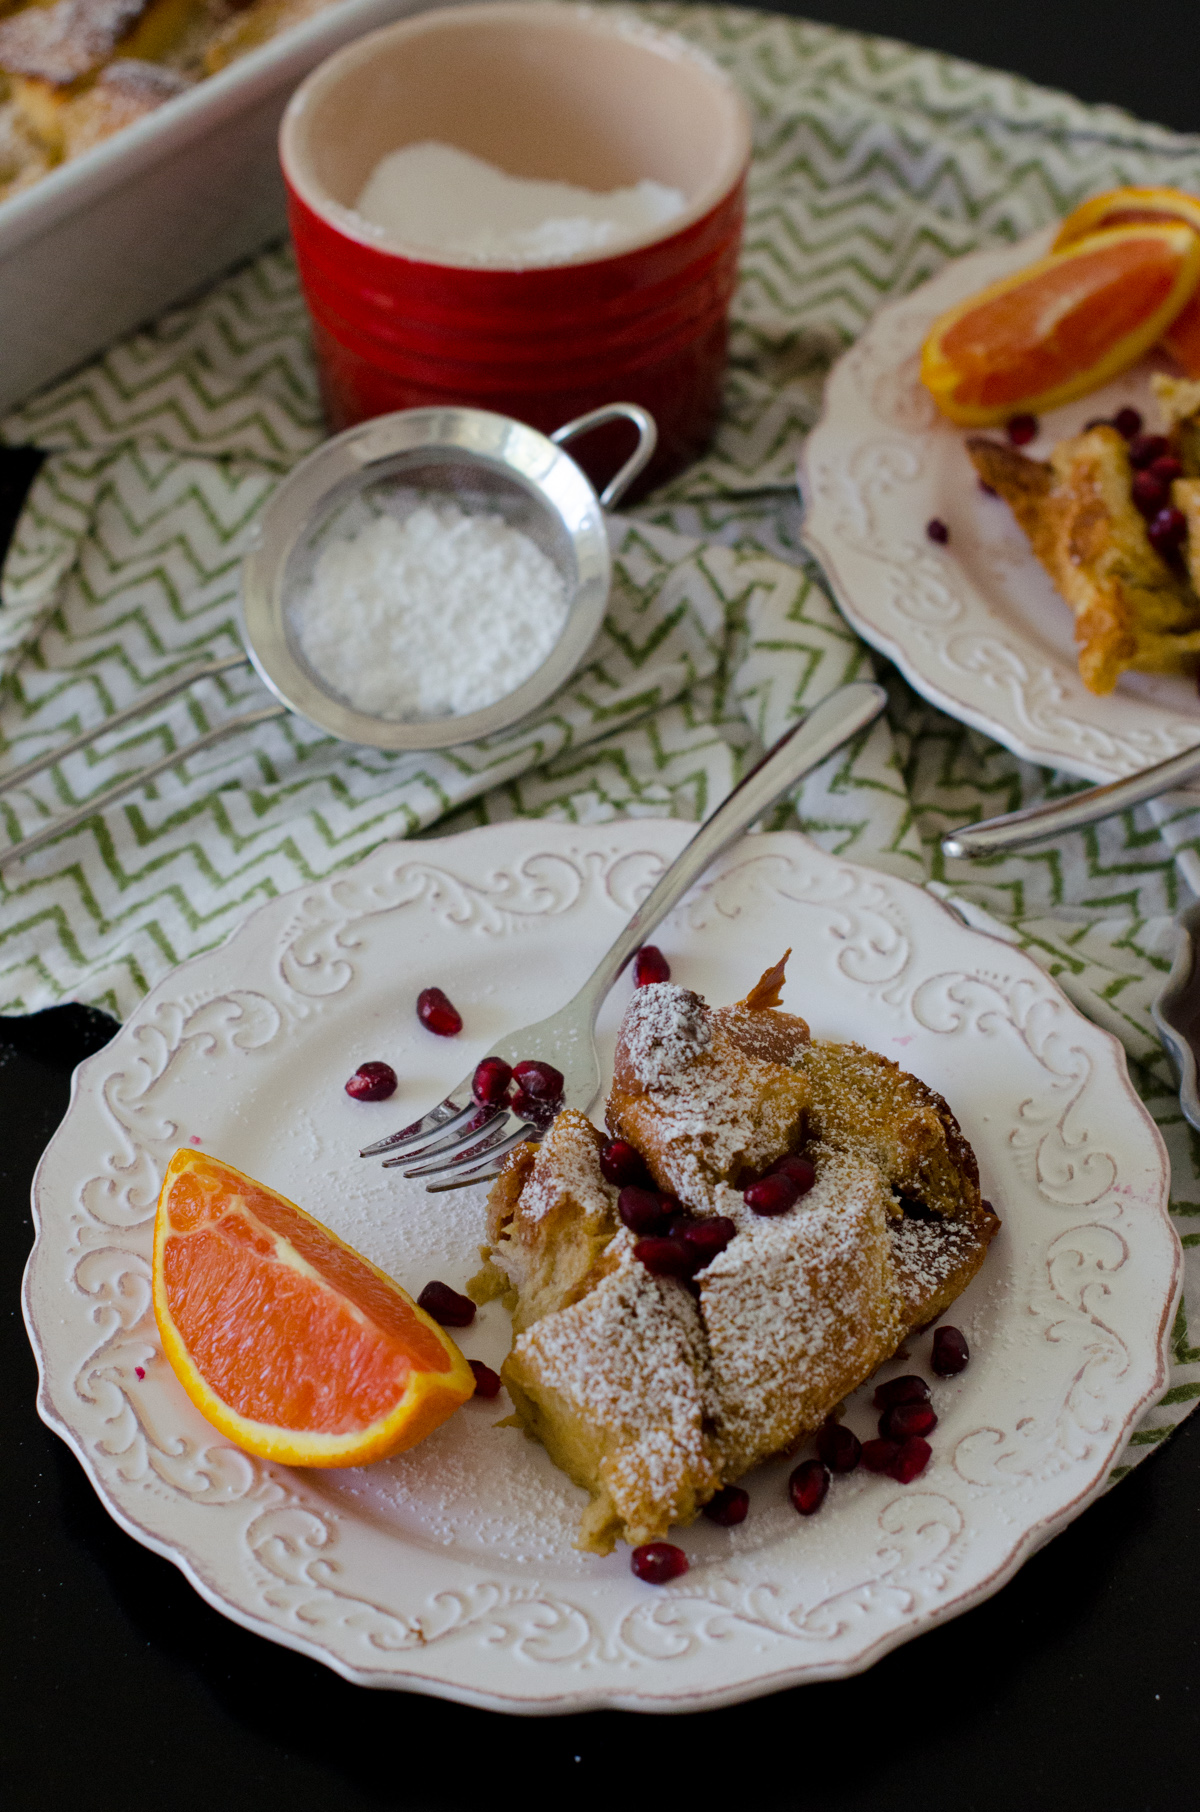 Dairy Free Challah French Toast Casserole recipe from ChefSarahElizabeth.com